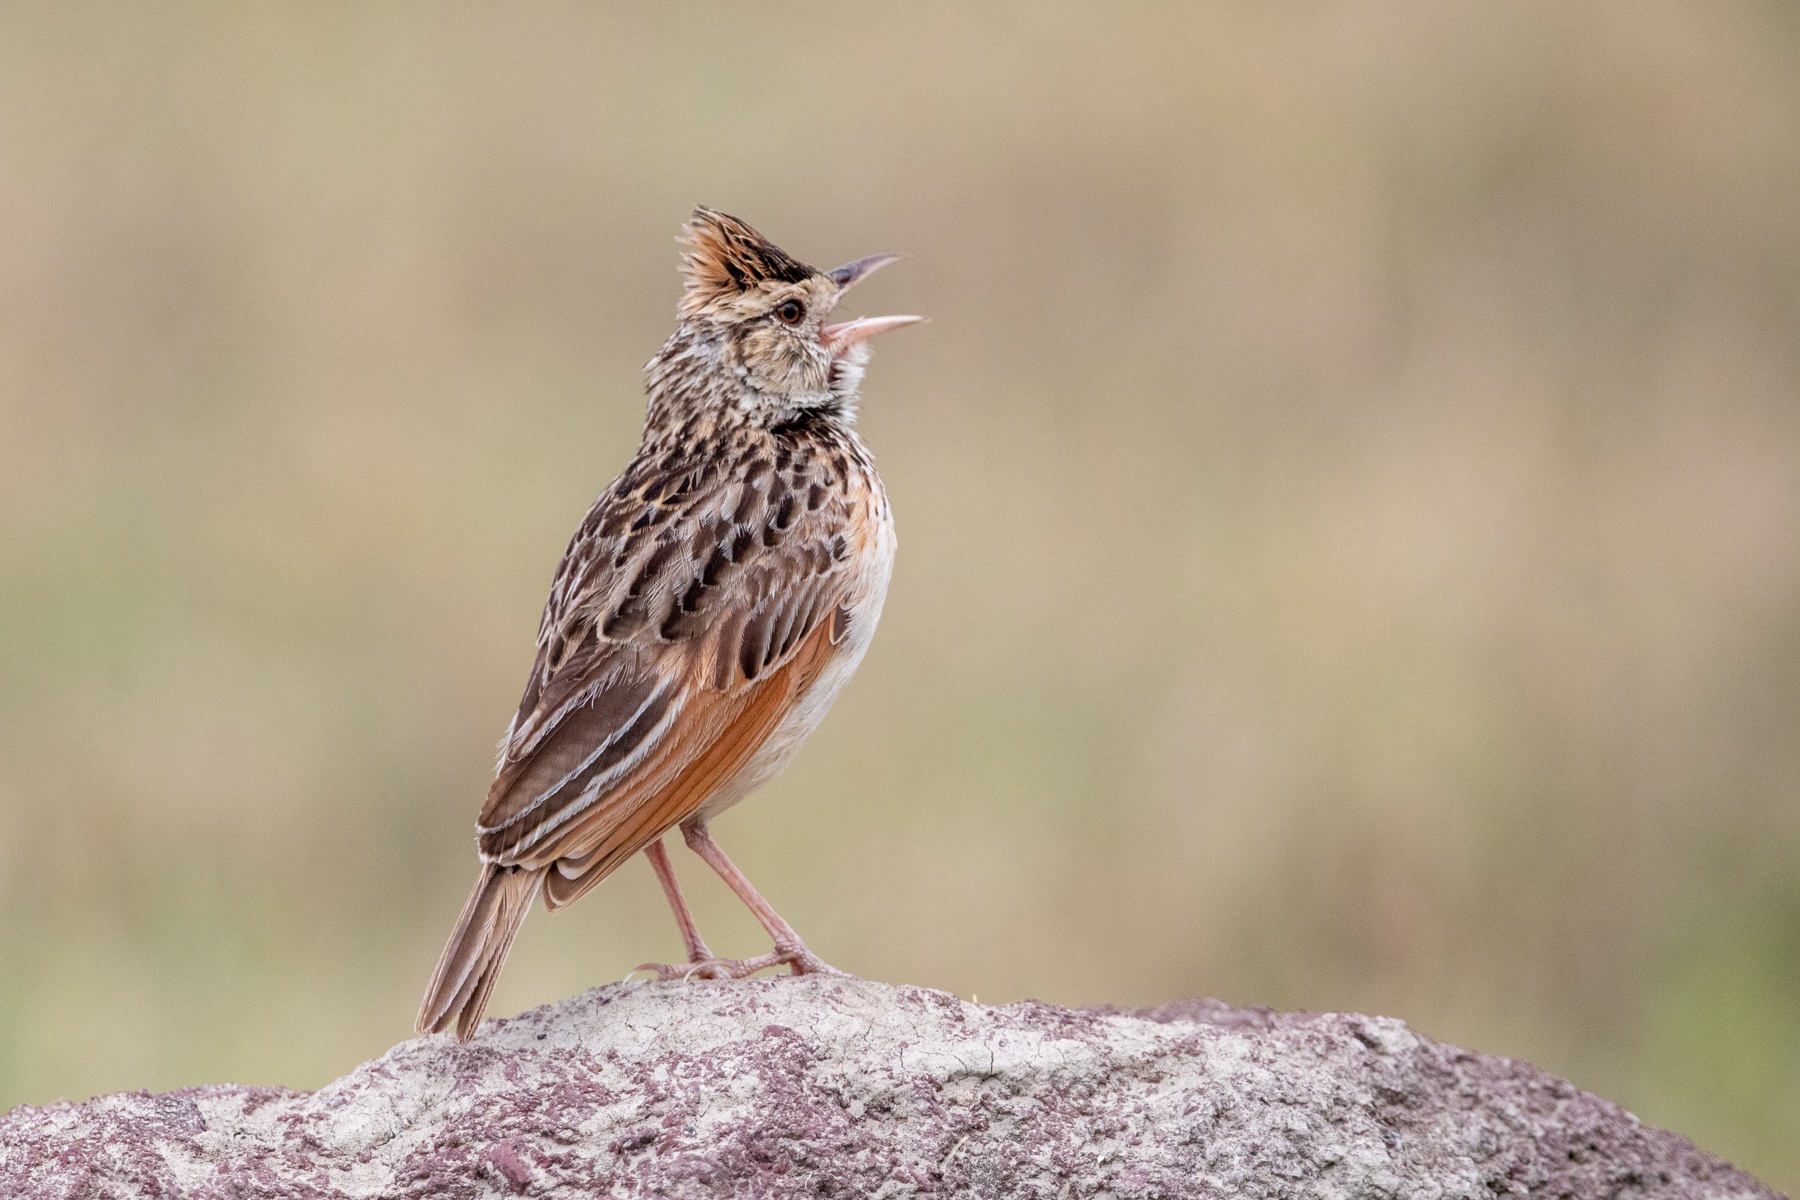 One of the funnier and regular features of our tour is the regular displays by Rufous-naped Larks